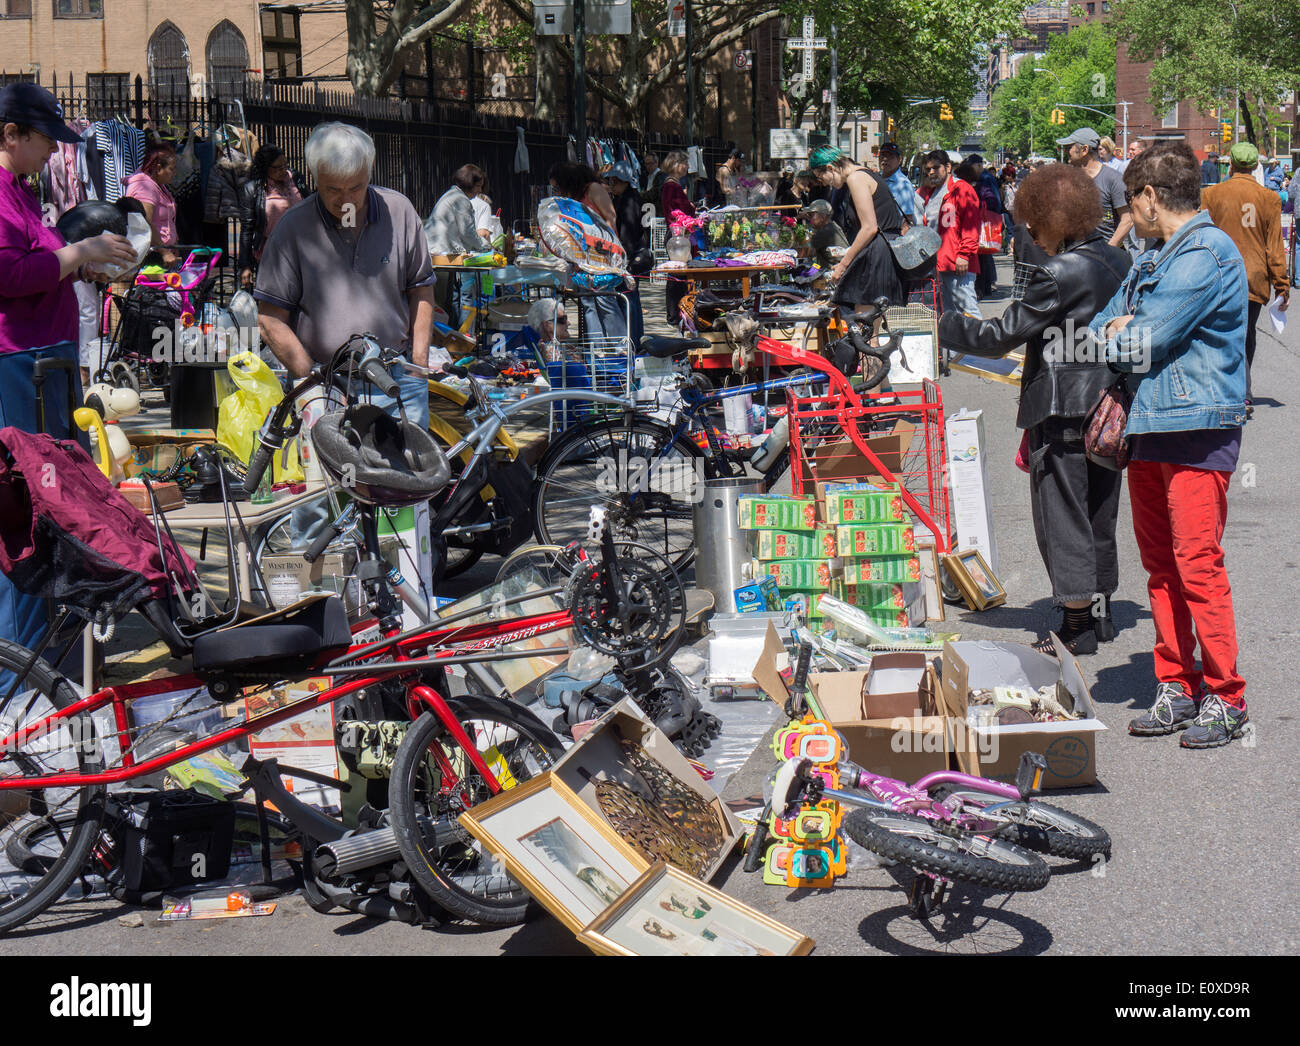 Shoppers search for bargains at a humongous flea market in the New York neighborhood of Chelsea Stock Photo